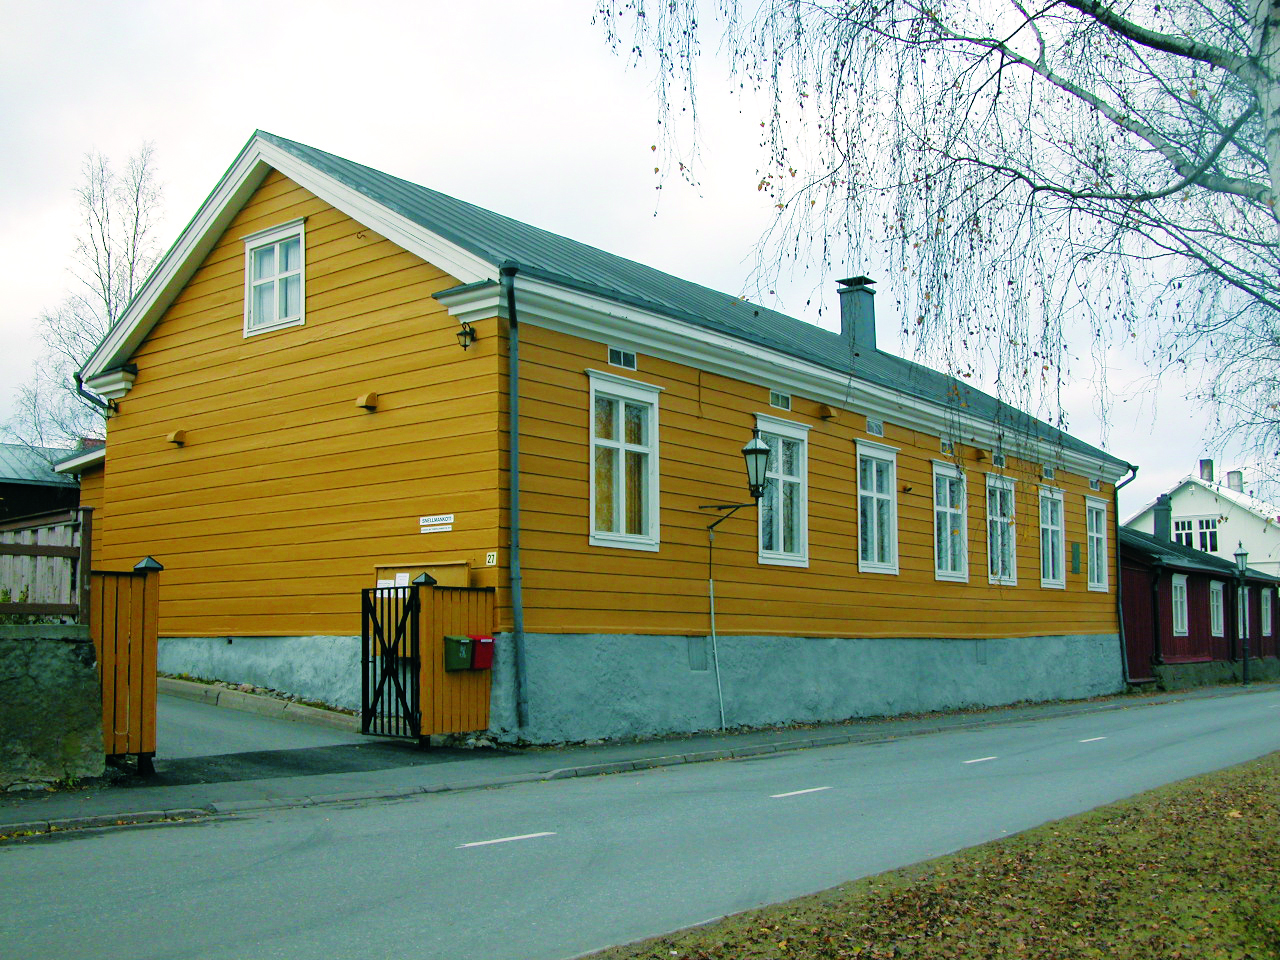 This yellow wooden house Snellmankoti locates in a centre of Kokkola.